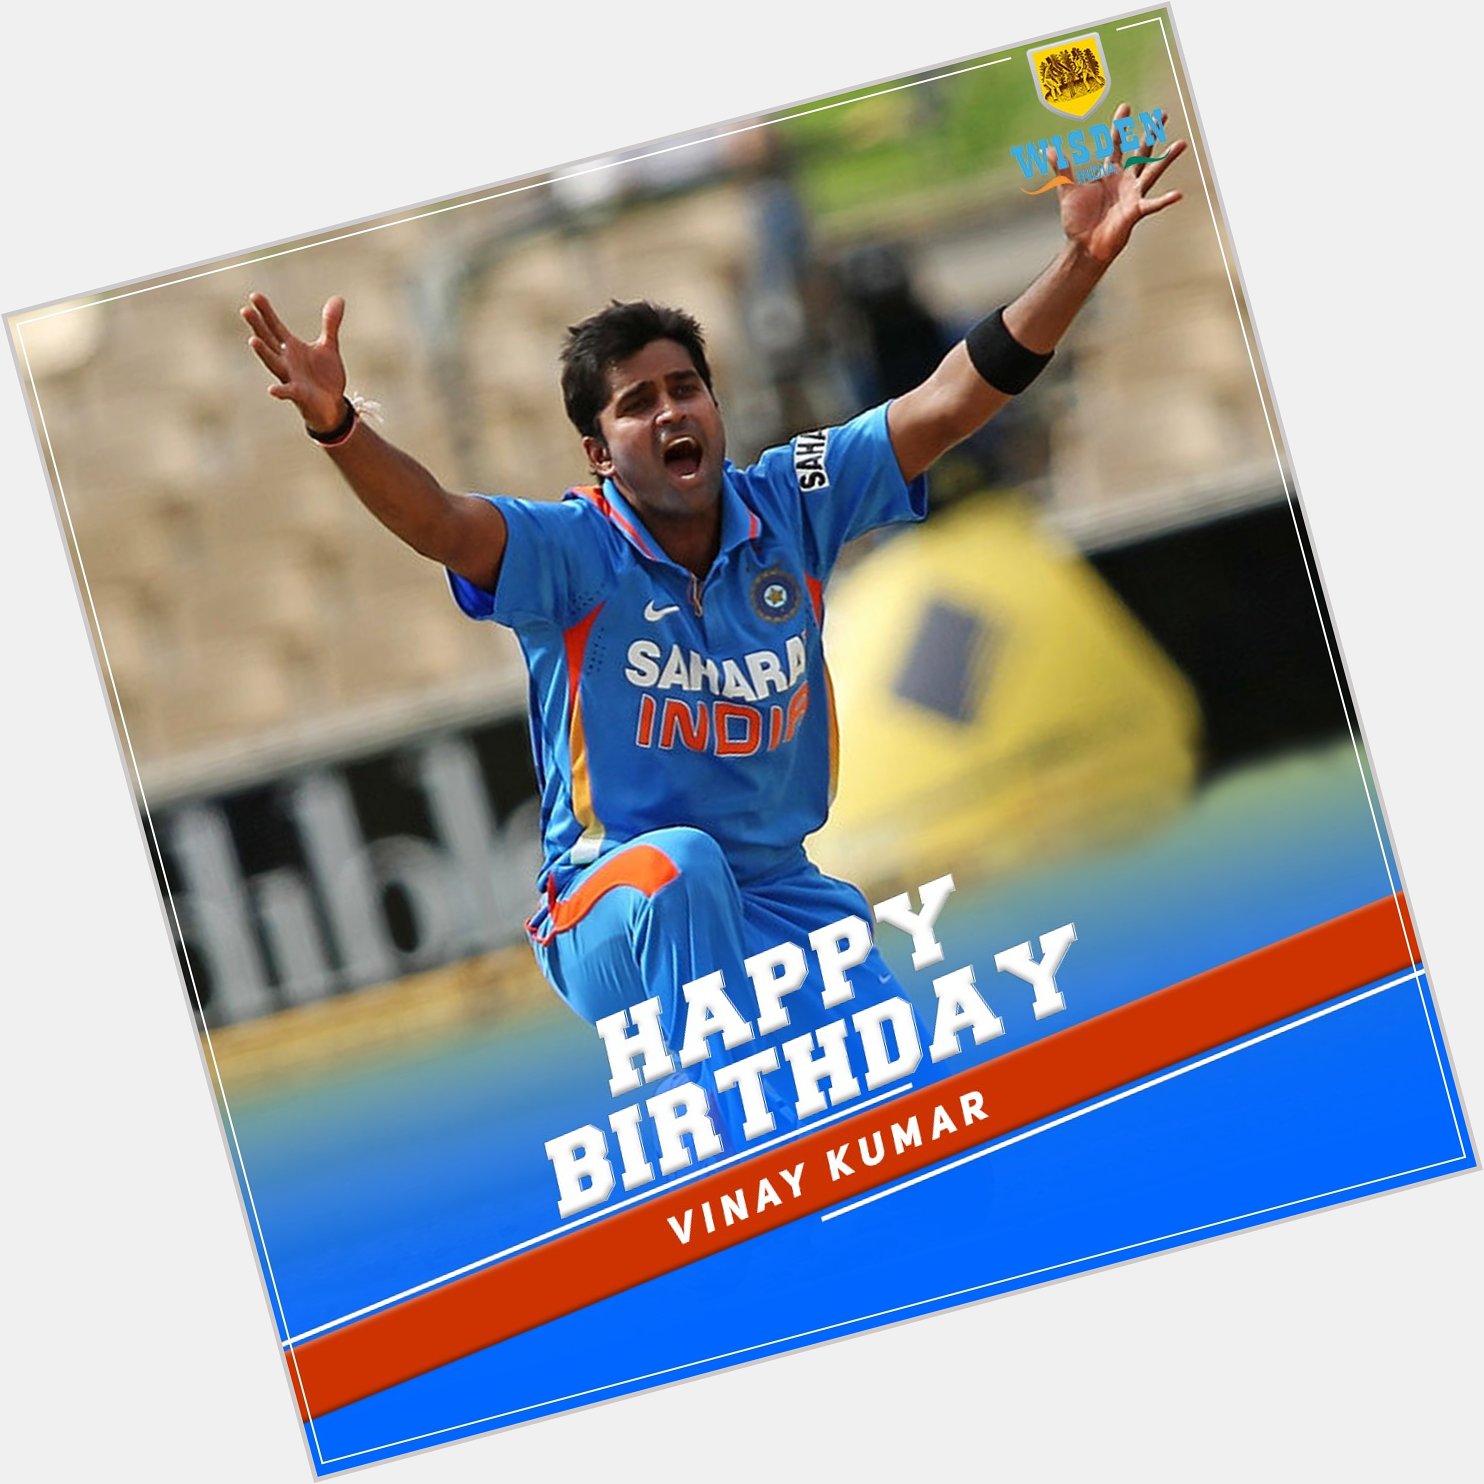 Wishing a very Happy Birthday to Indian pacer and skipper  